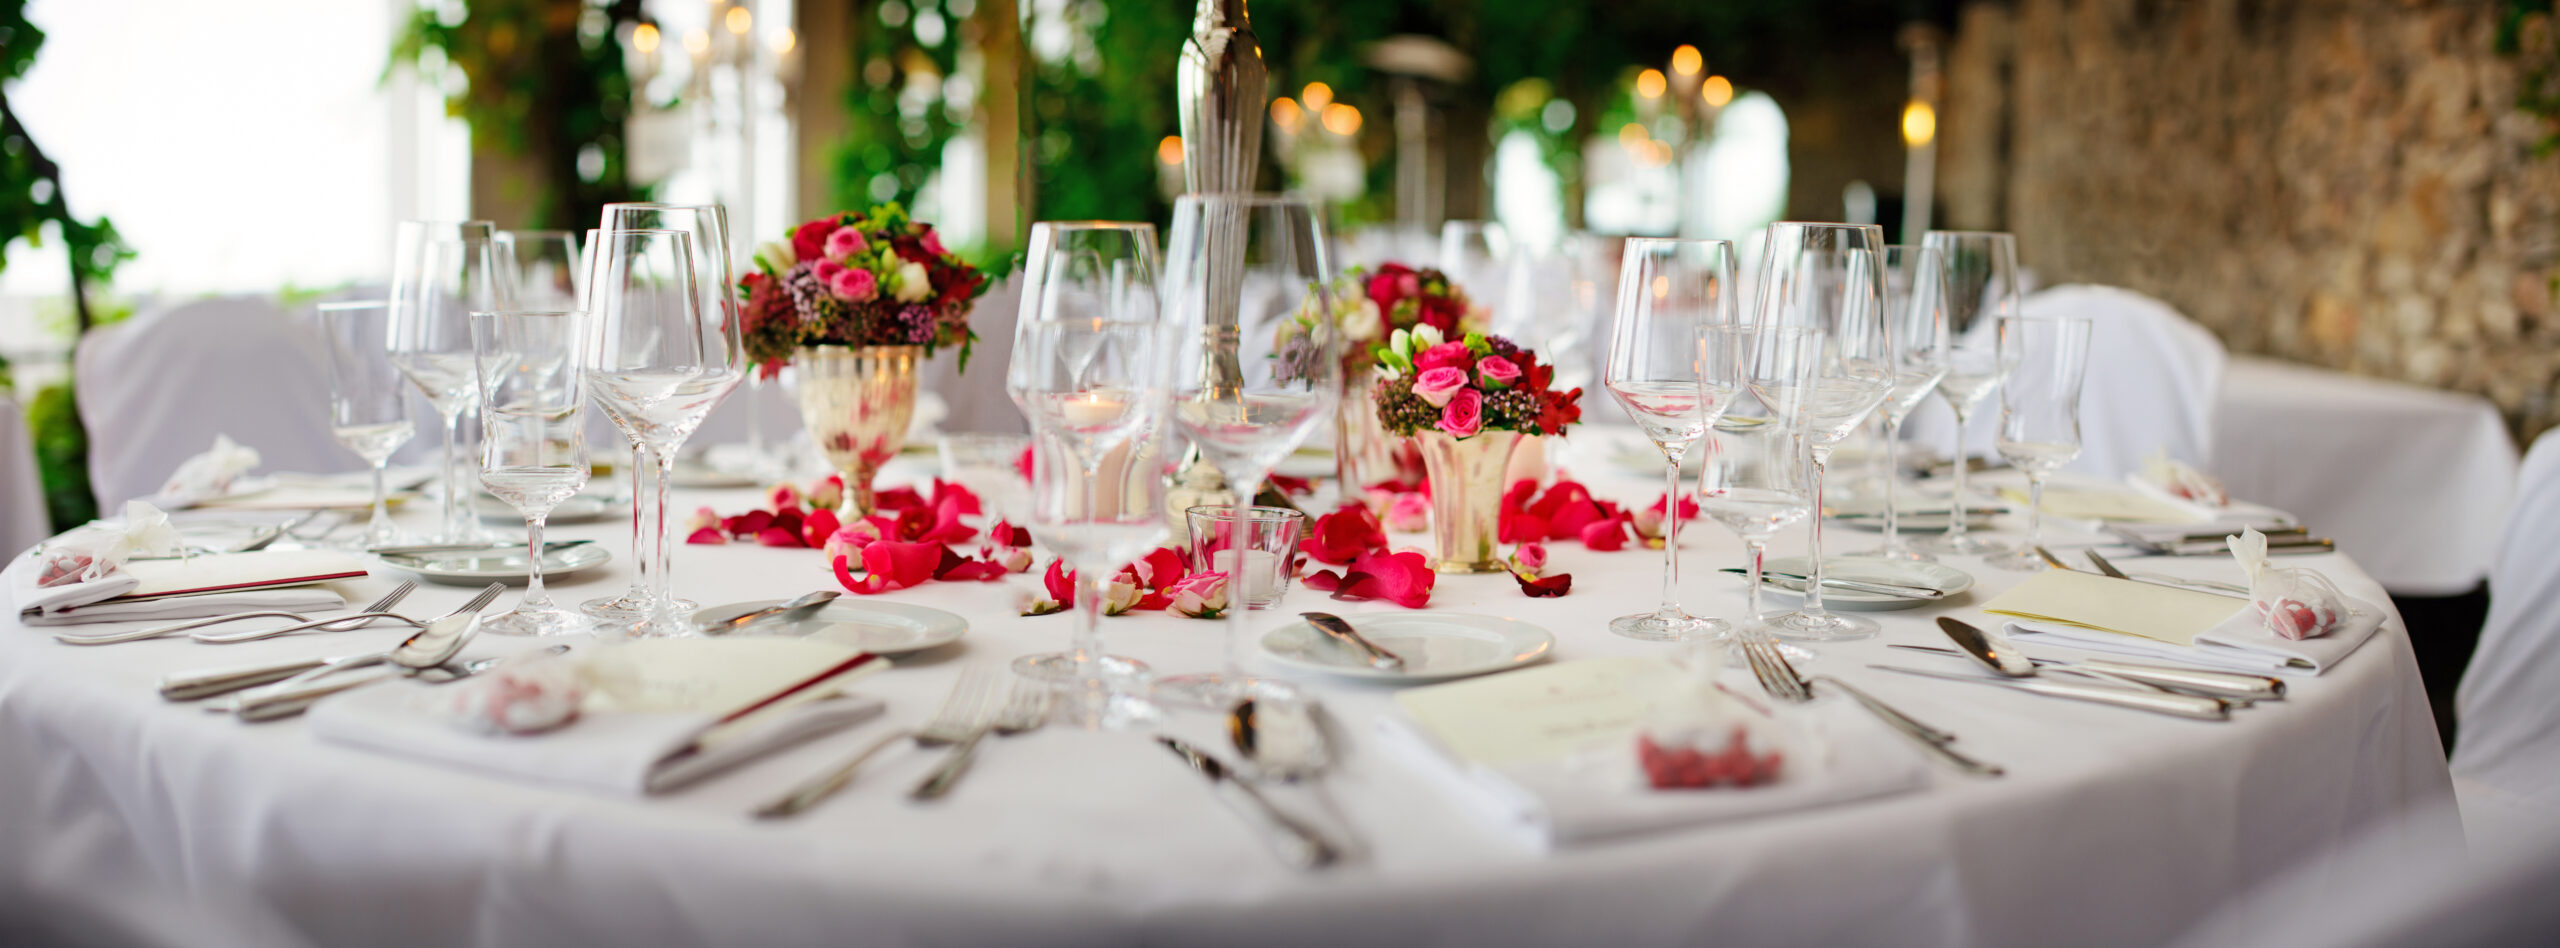 decorated table in a luxury location